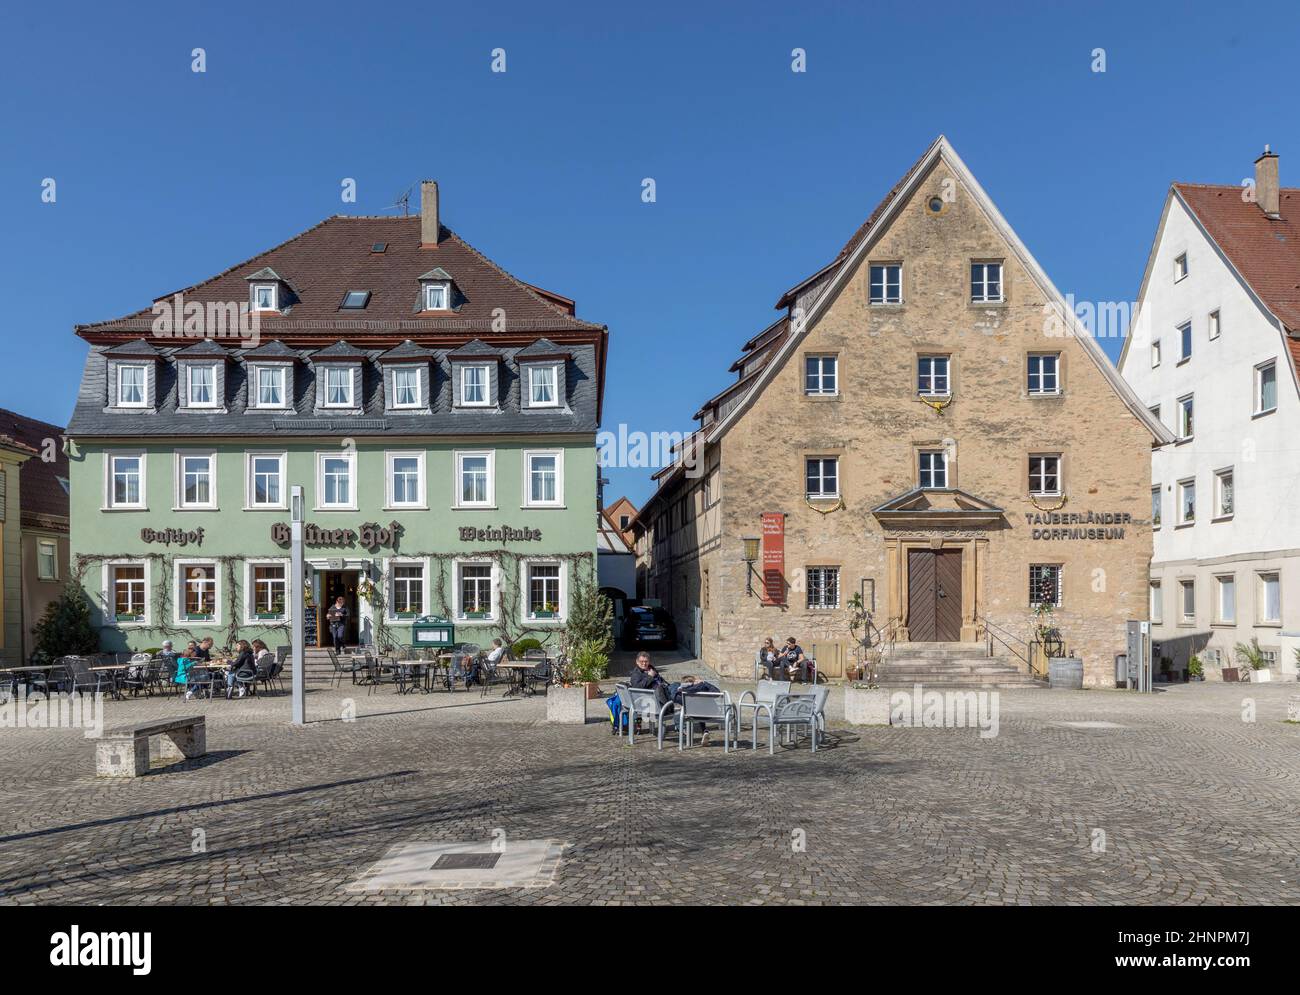 tourists relax at the town central square of Weikersheim along the romantic road Stock Photo